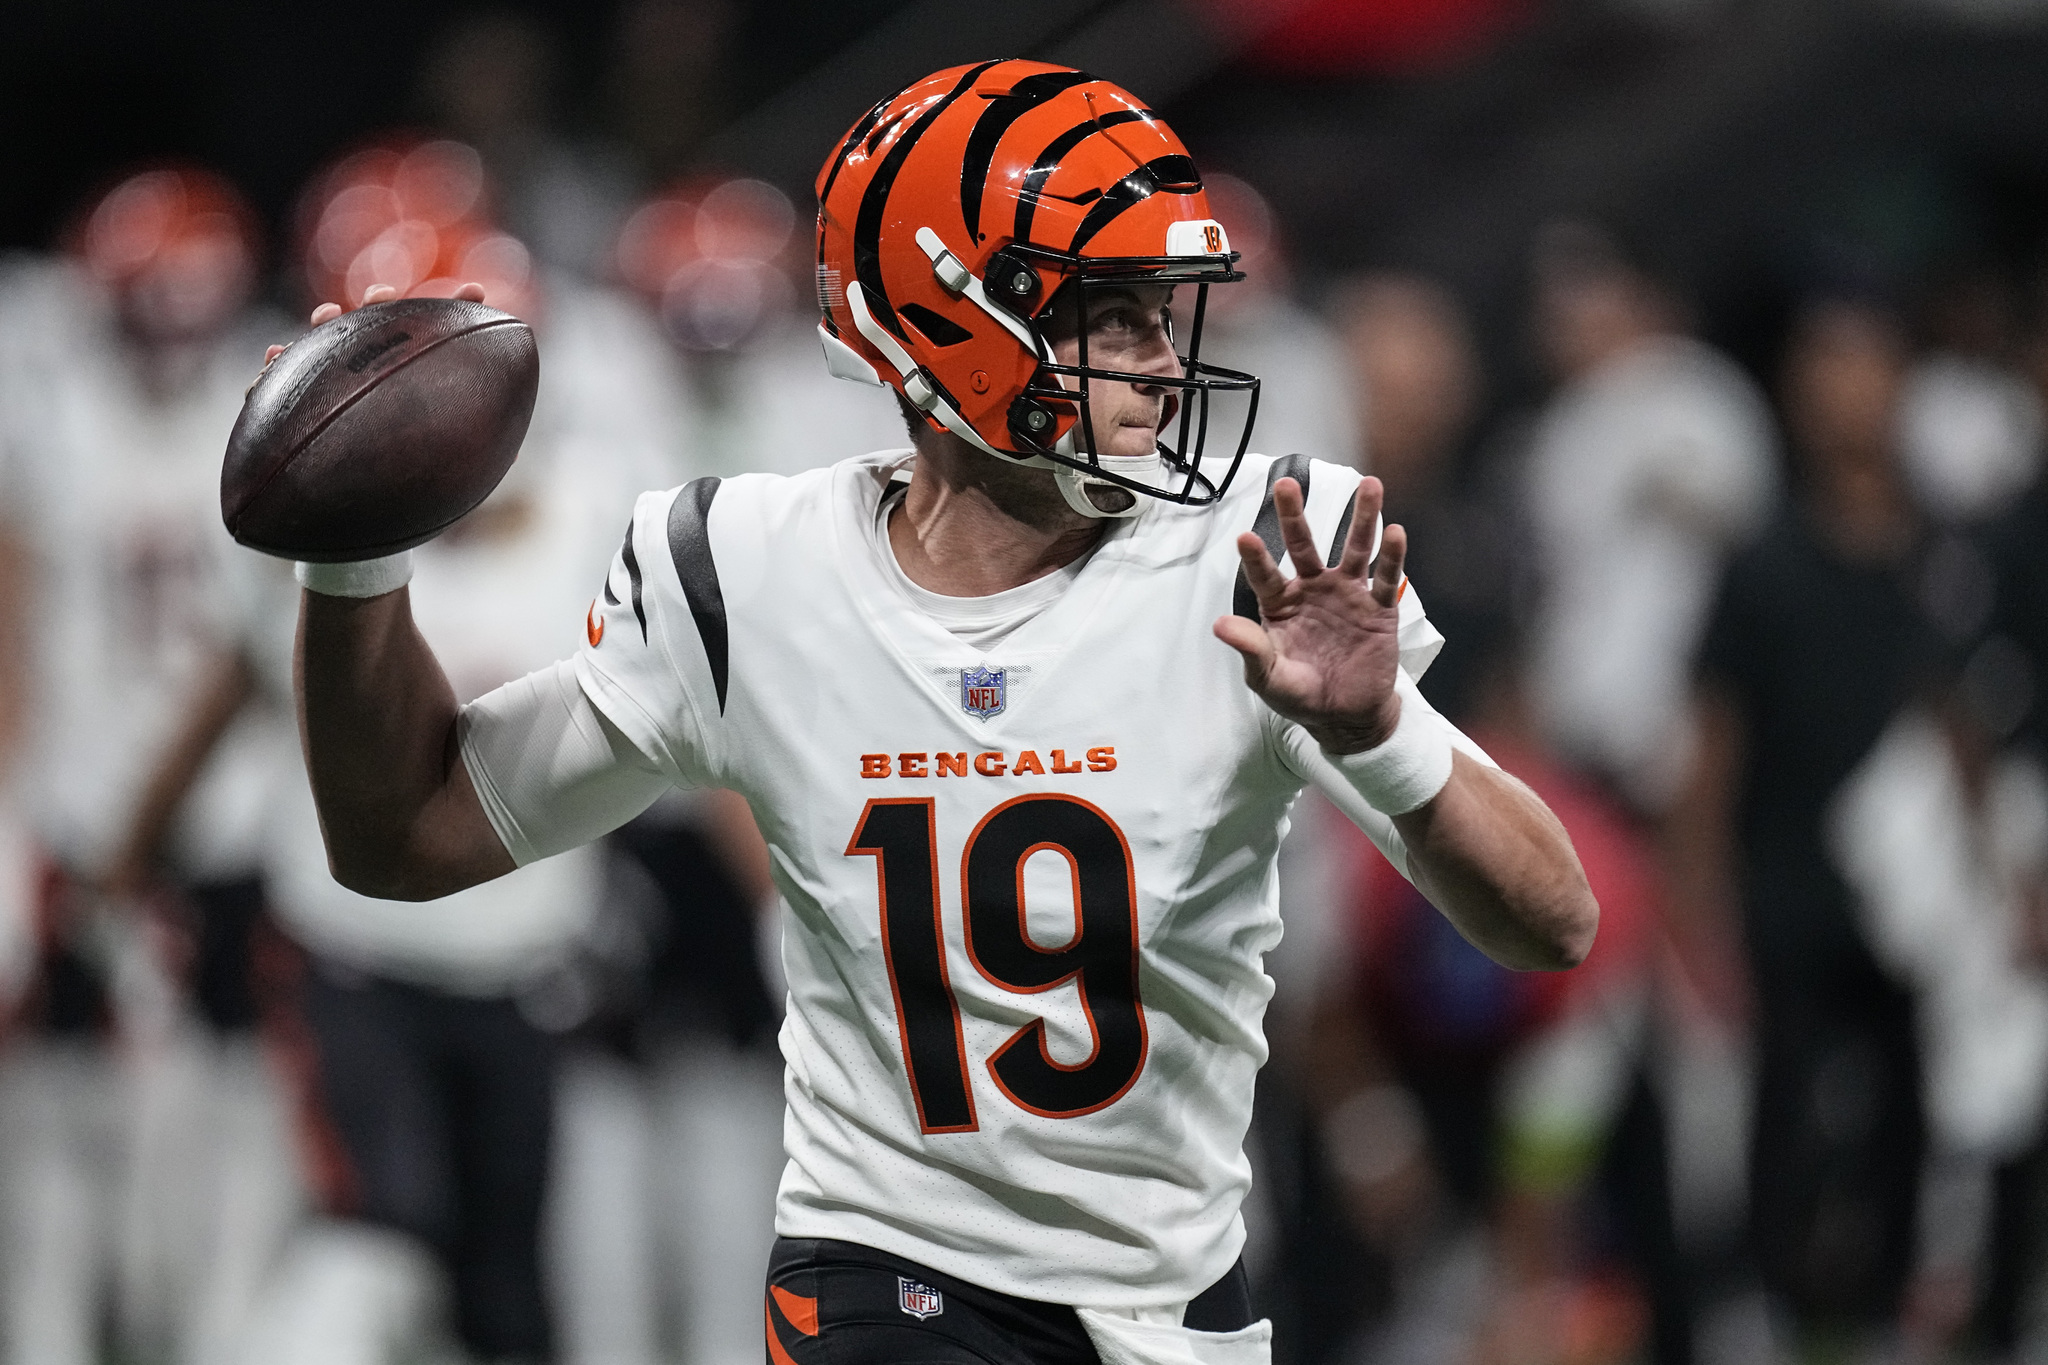 bengals game today where to watch